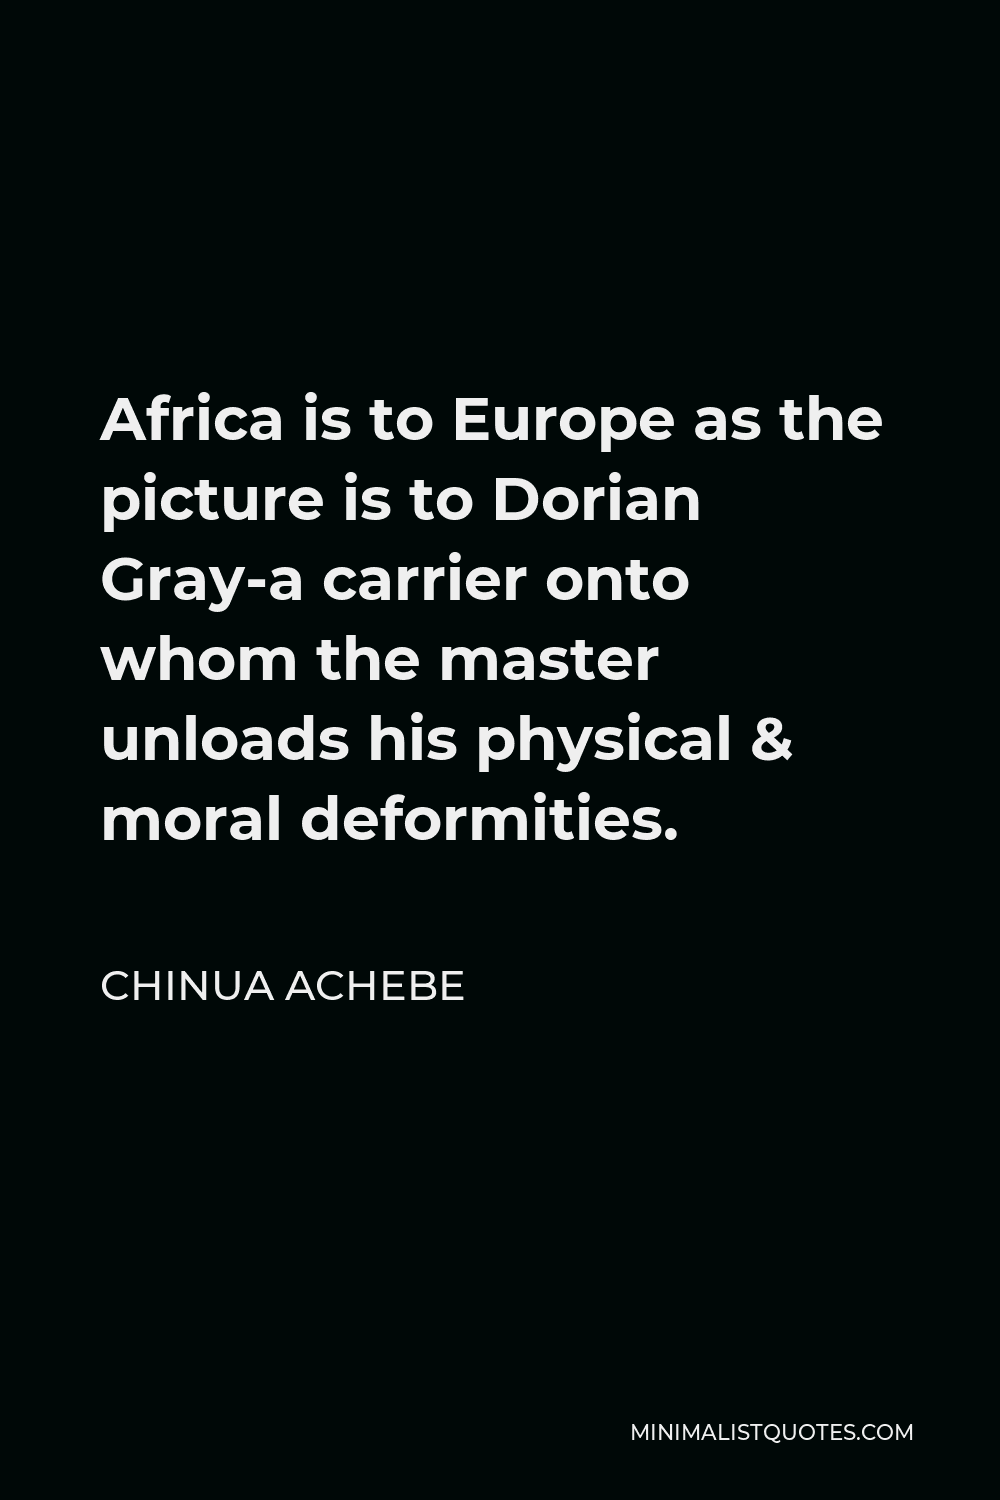 Chinua Achebe Quote - Africa is to Europe as the picture is to Dorian Gray-a carrier onto whom the master unloads his physical & moral deformities.